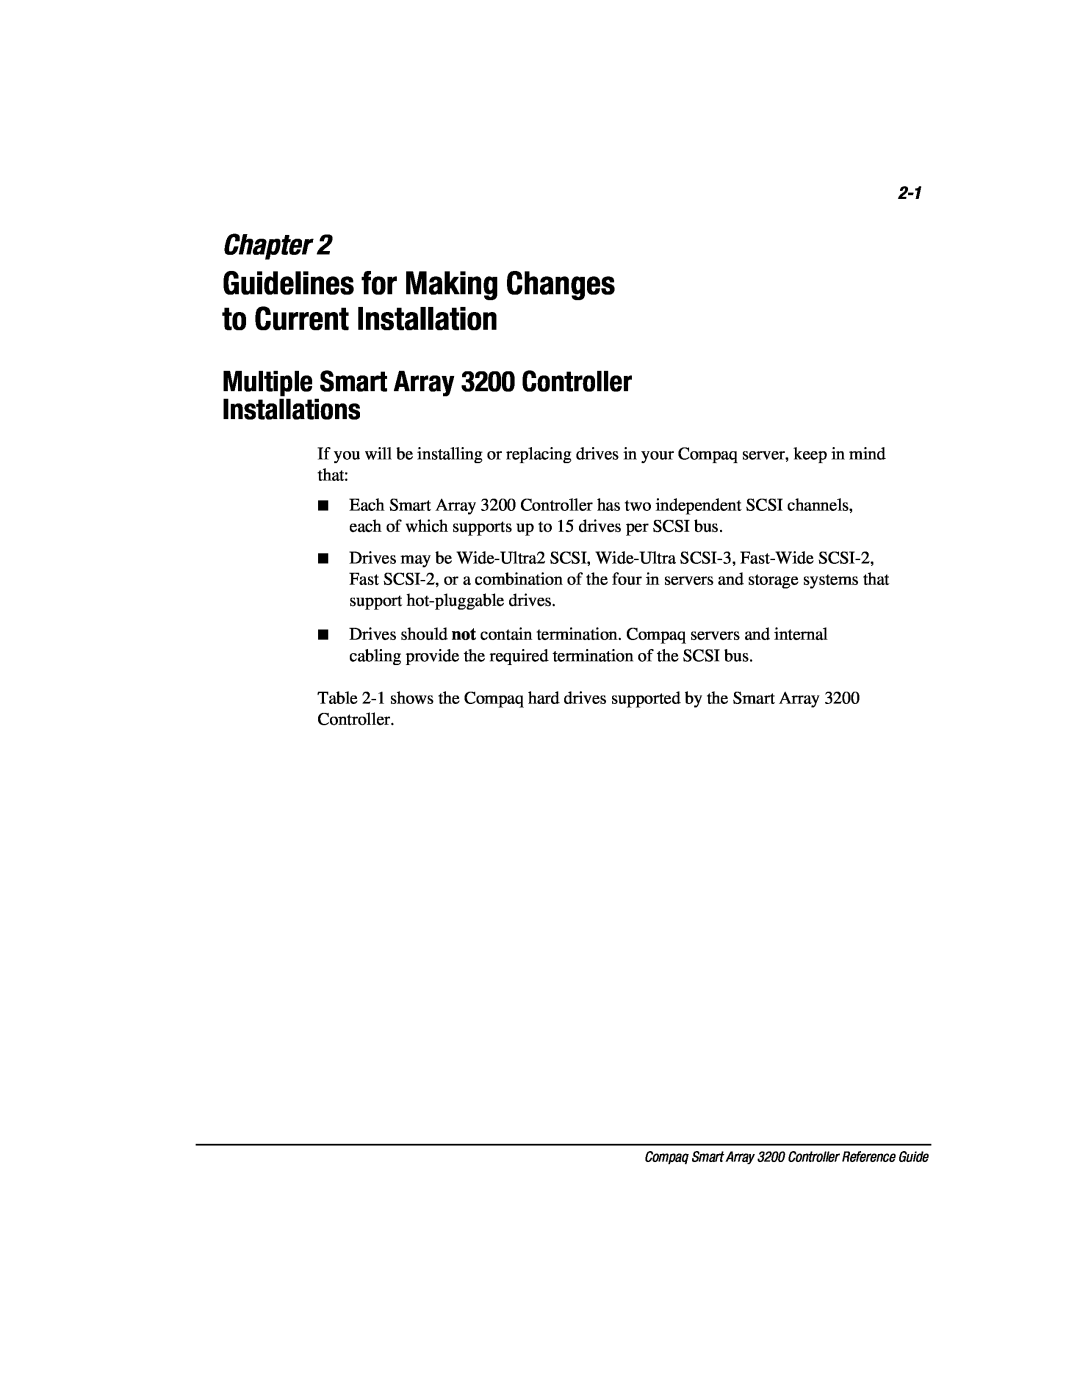 Compaq manual Multiple Smart Array 3200 Controller Installations, Chapter 